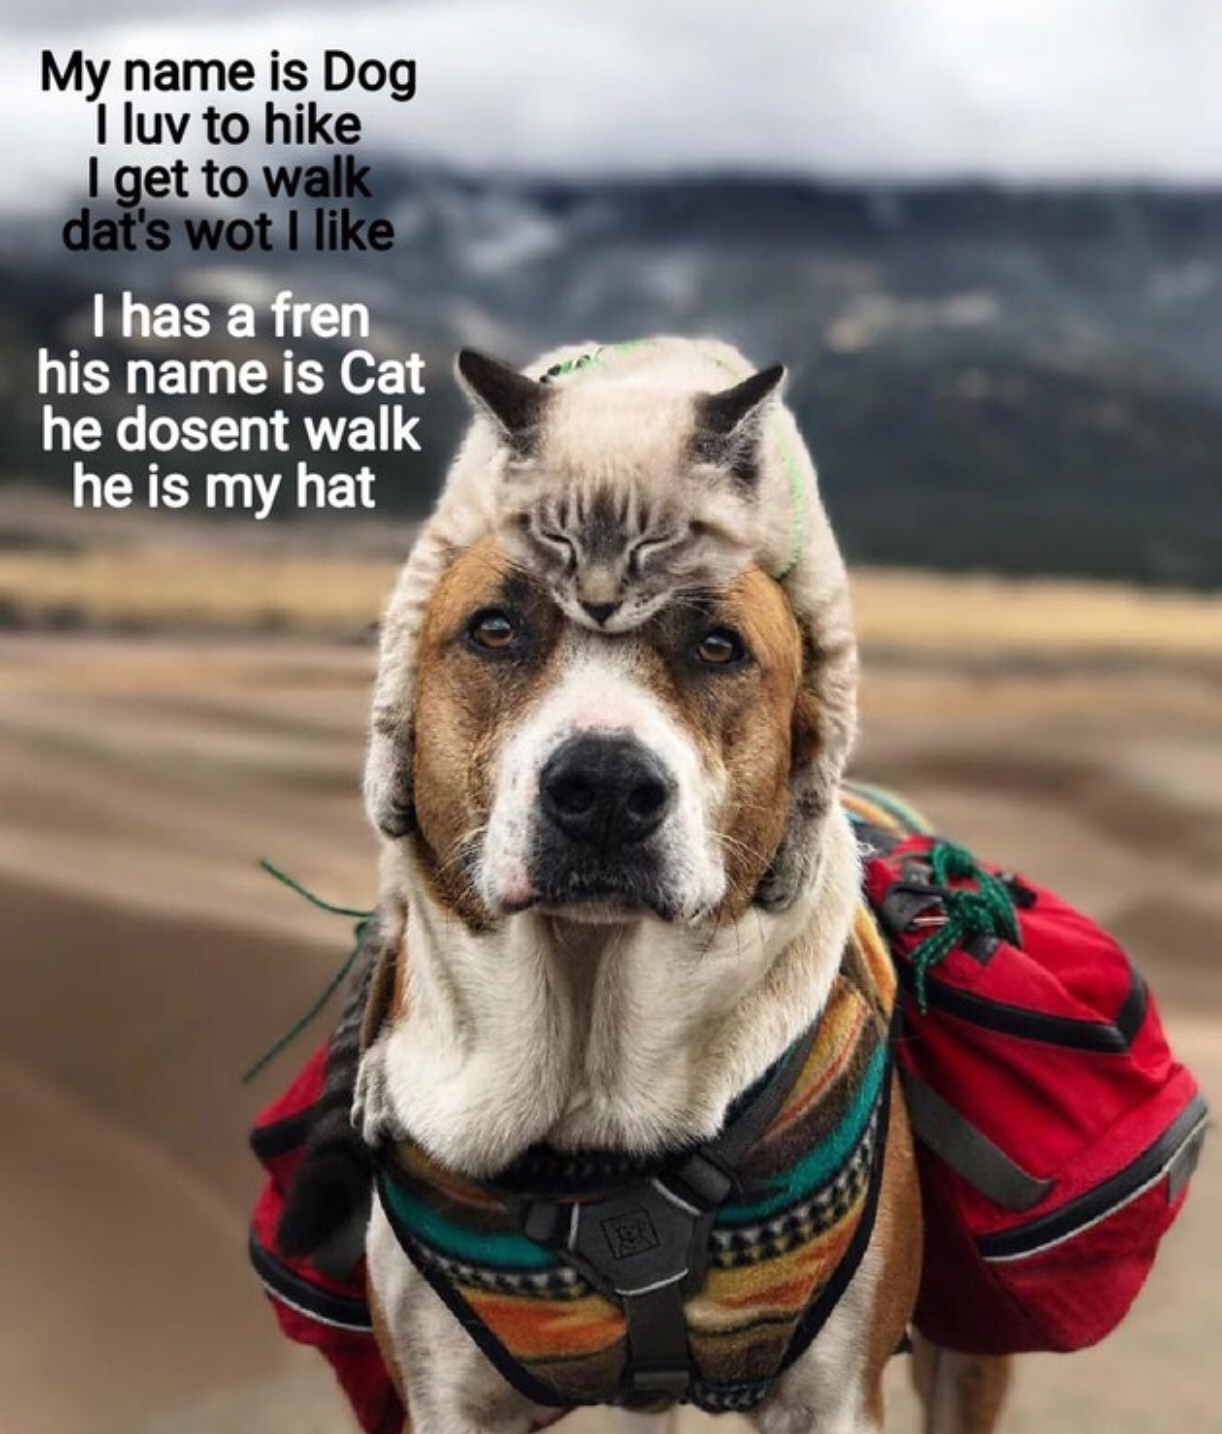 cat and dog travel together - My name is Dog I luv to hike I get to walk dat's wot I I has a fren his name is Cat he dosent walk he is my hat